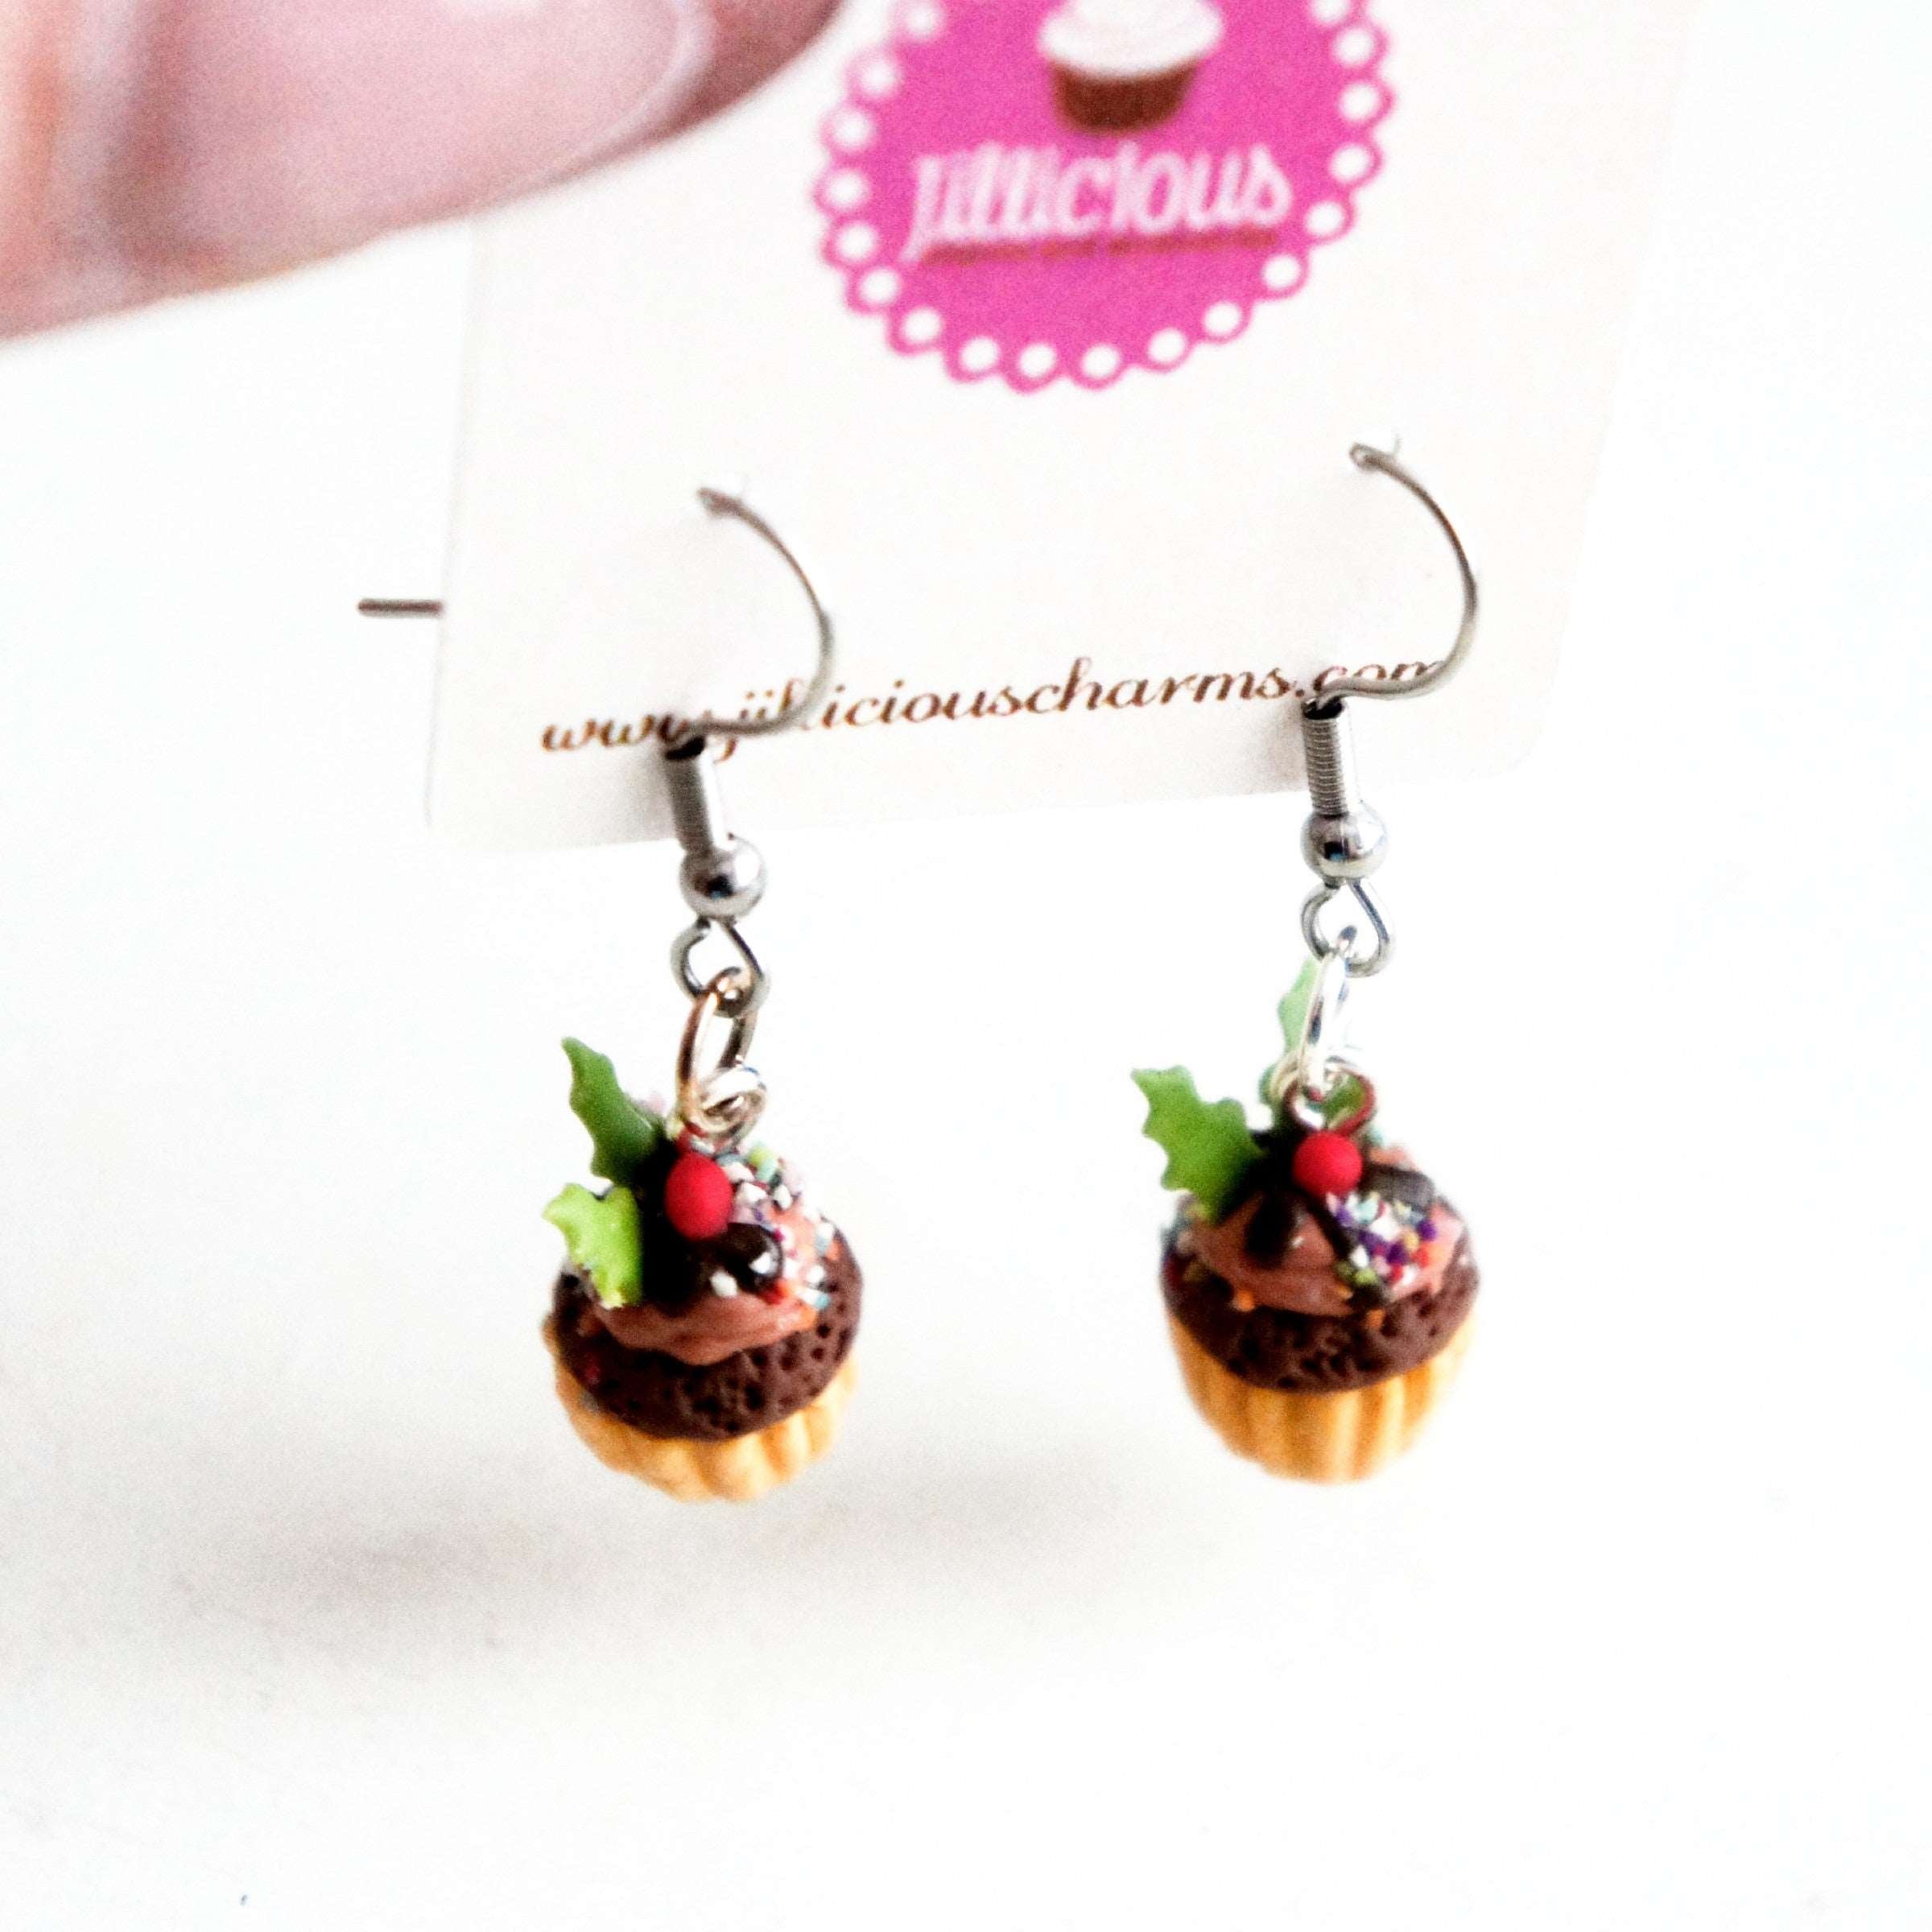 Christmas Cupcake Dangle Earrings - Jillicious charms and accessories